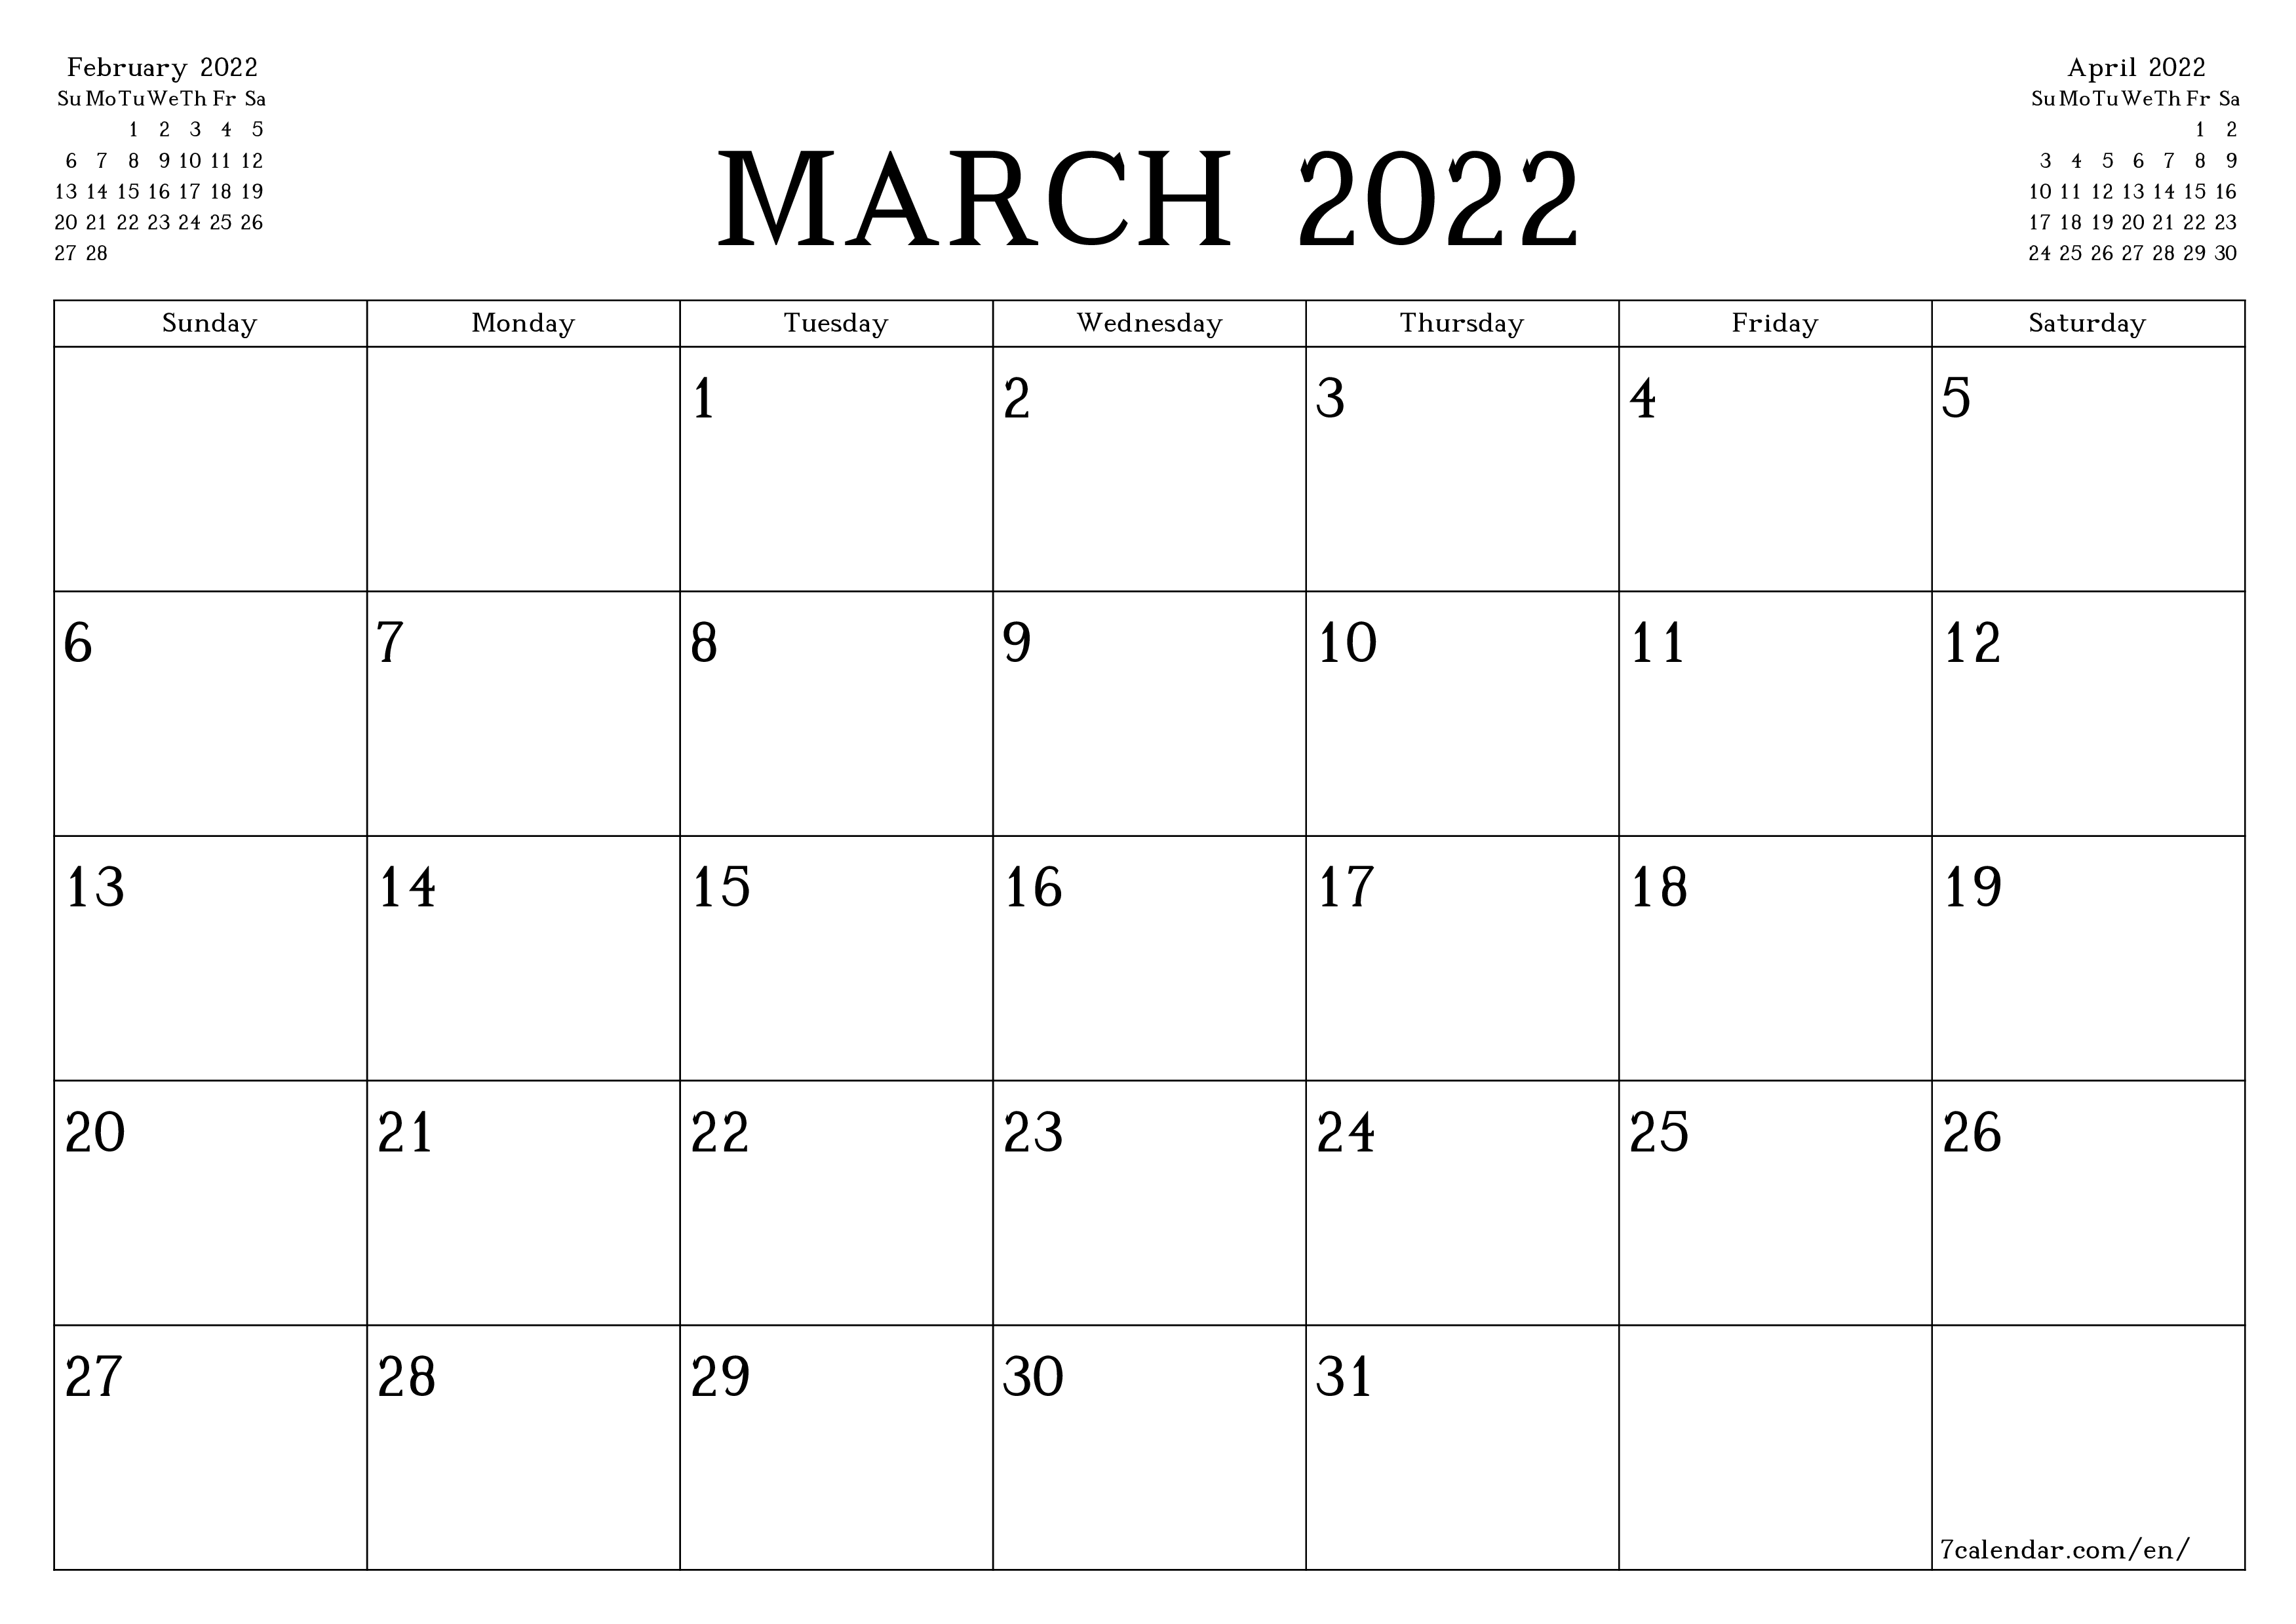 Printable Calendar By Month 2022 March 2022 Free Printable Calendars And Planners, Pdf Templates - 7Calendar